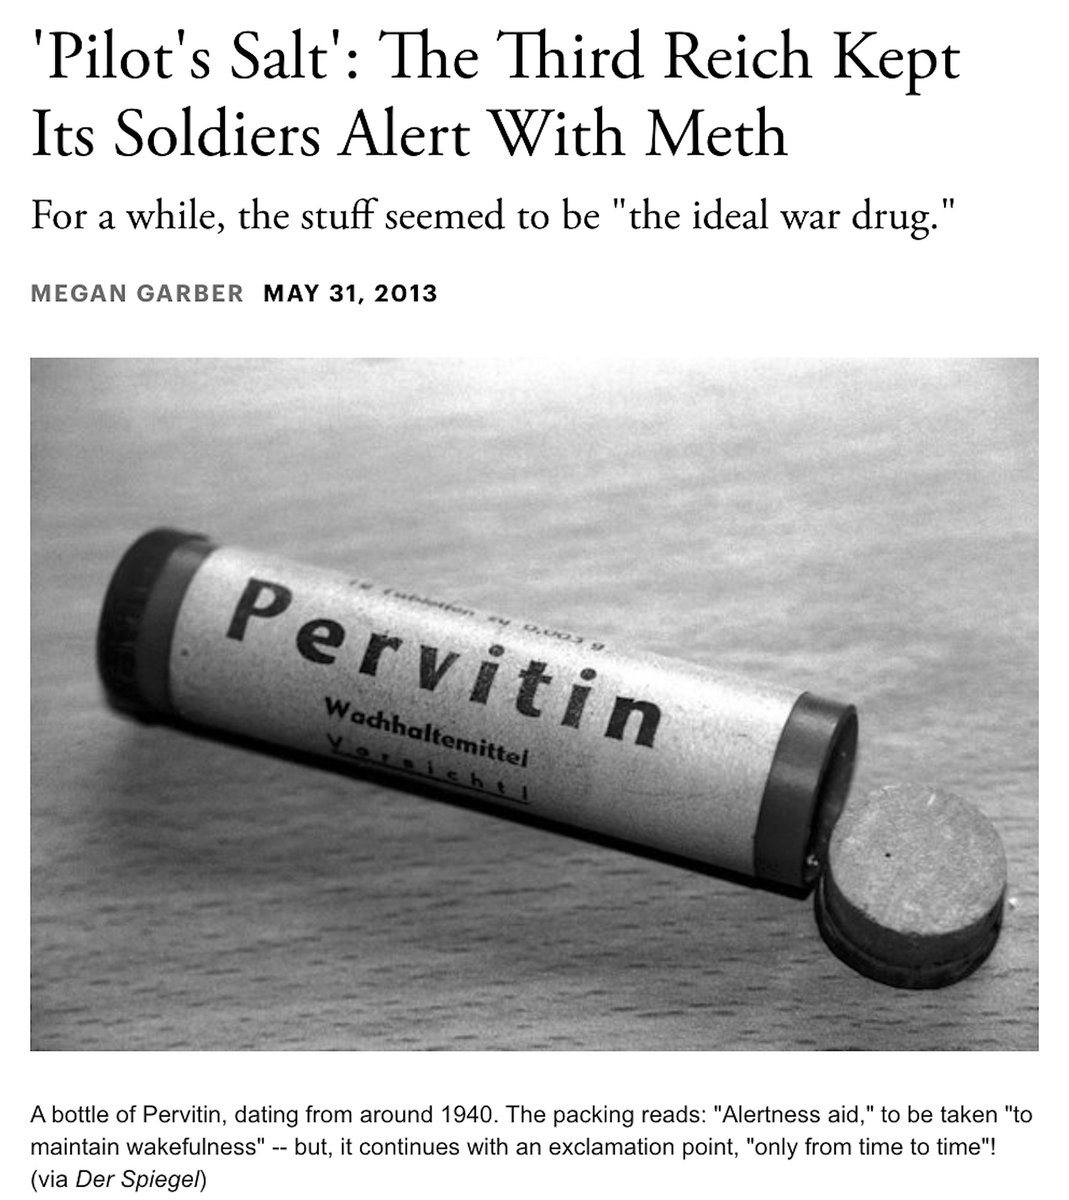 'Just One Of These Pills, Böll Explained, Was As Effective At Keeping Him Alert As Several Cups Of Coffee. Plus, When He Took Pervitin, He Was Able To Forget, Temporarily, About The Trials And Terrors Of War. He Could - For A While, At Least - Be Happy.' https://www.theatlantic.com/technology/archive/2013/05/pilots-salt-the-third-reich-kept-its-soldiers-alert-with-meth/276429/